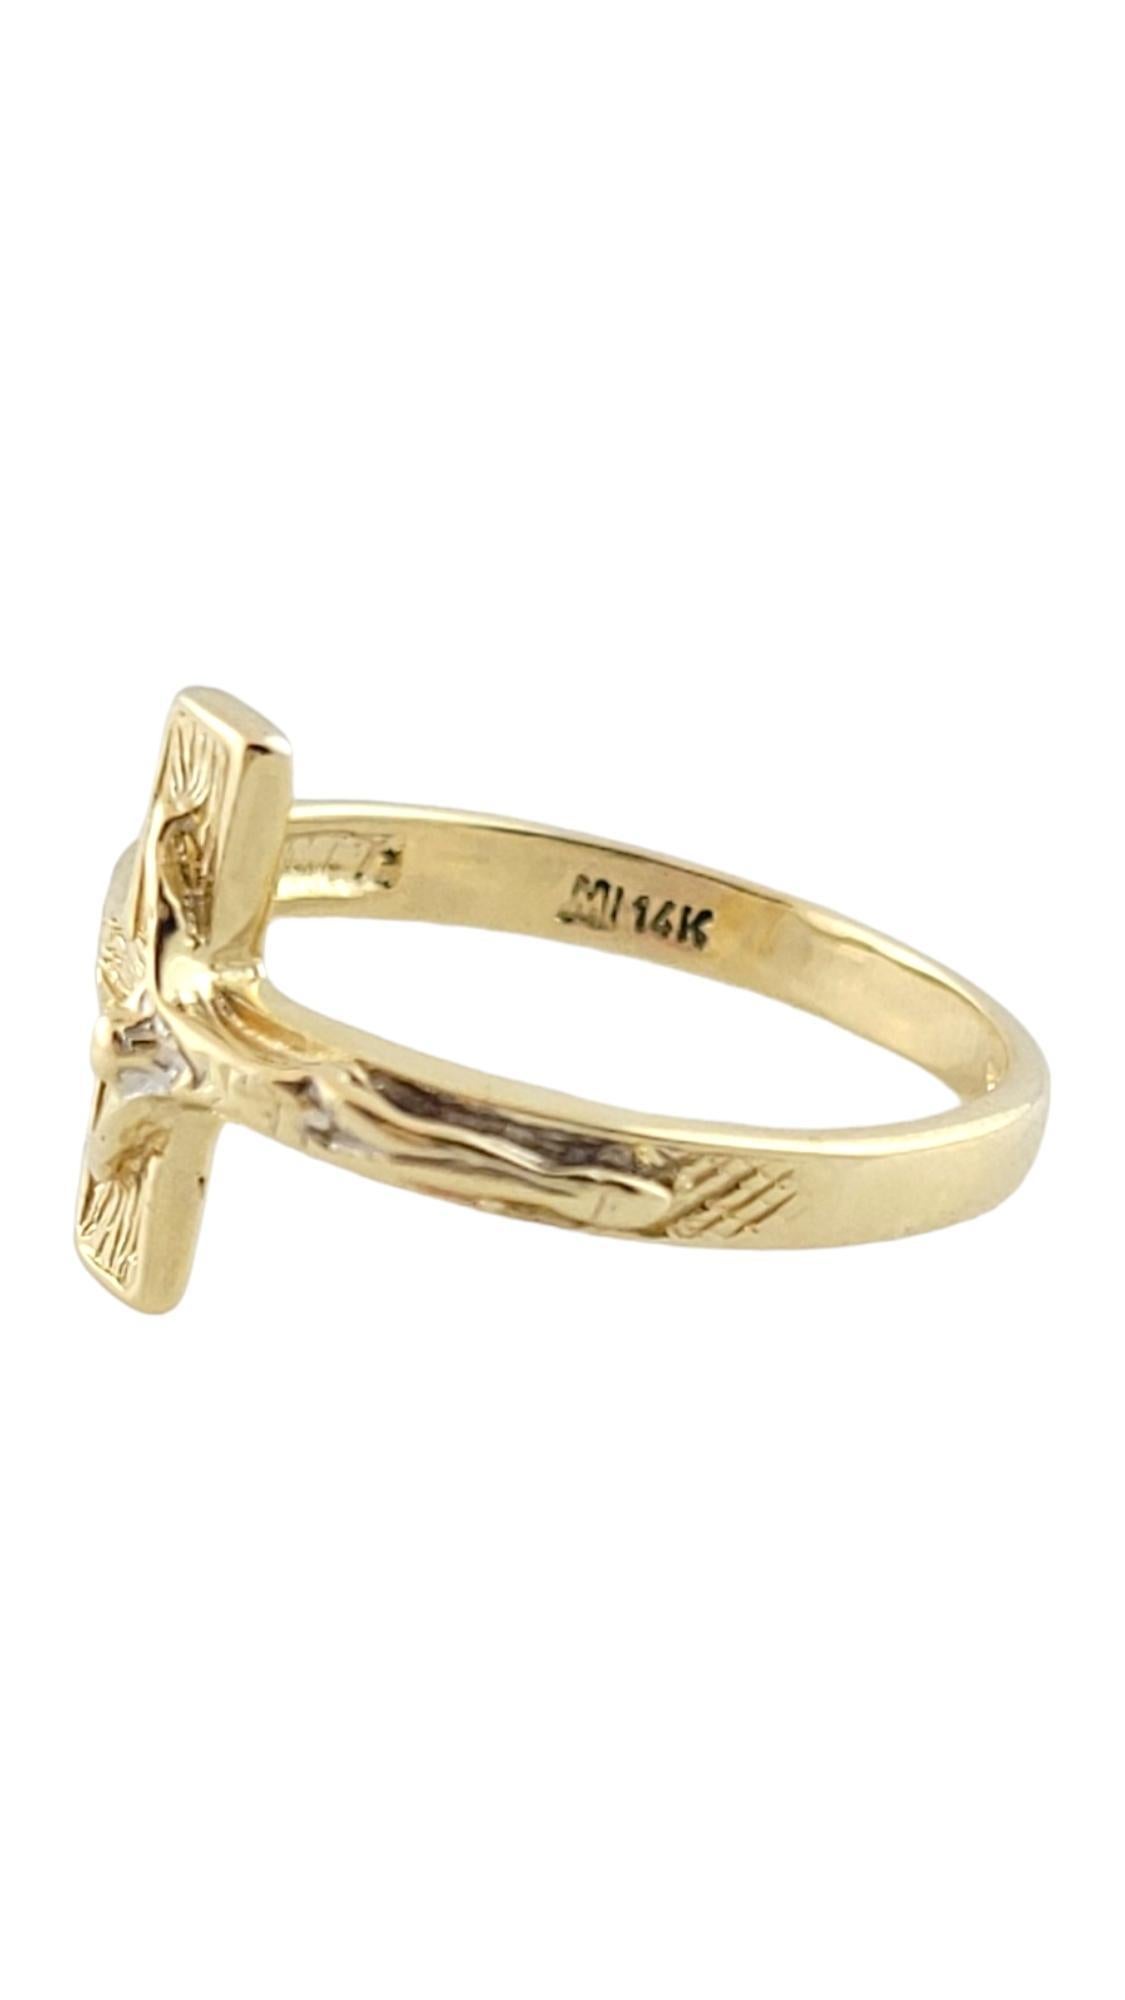 Vintage 14K Yellow Gold Cross Ring Size 6.5

This gorgeous 14K yellow gold rung has a beautiful cross in the front that wraps around the band!

Ring size: 6.5
Shank: 2.31mm
Front: 12.0mm

Weight: 1.39 dwt/ 2.16 g

Hallmark: Turkey M 14K

*Chain not